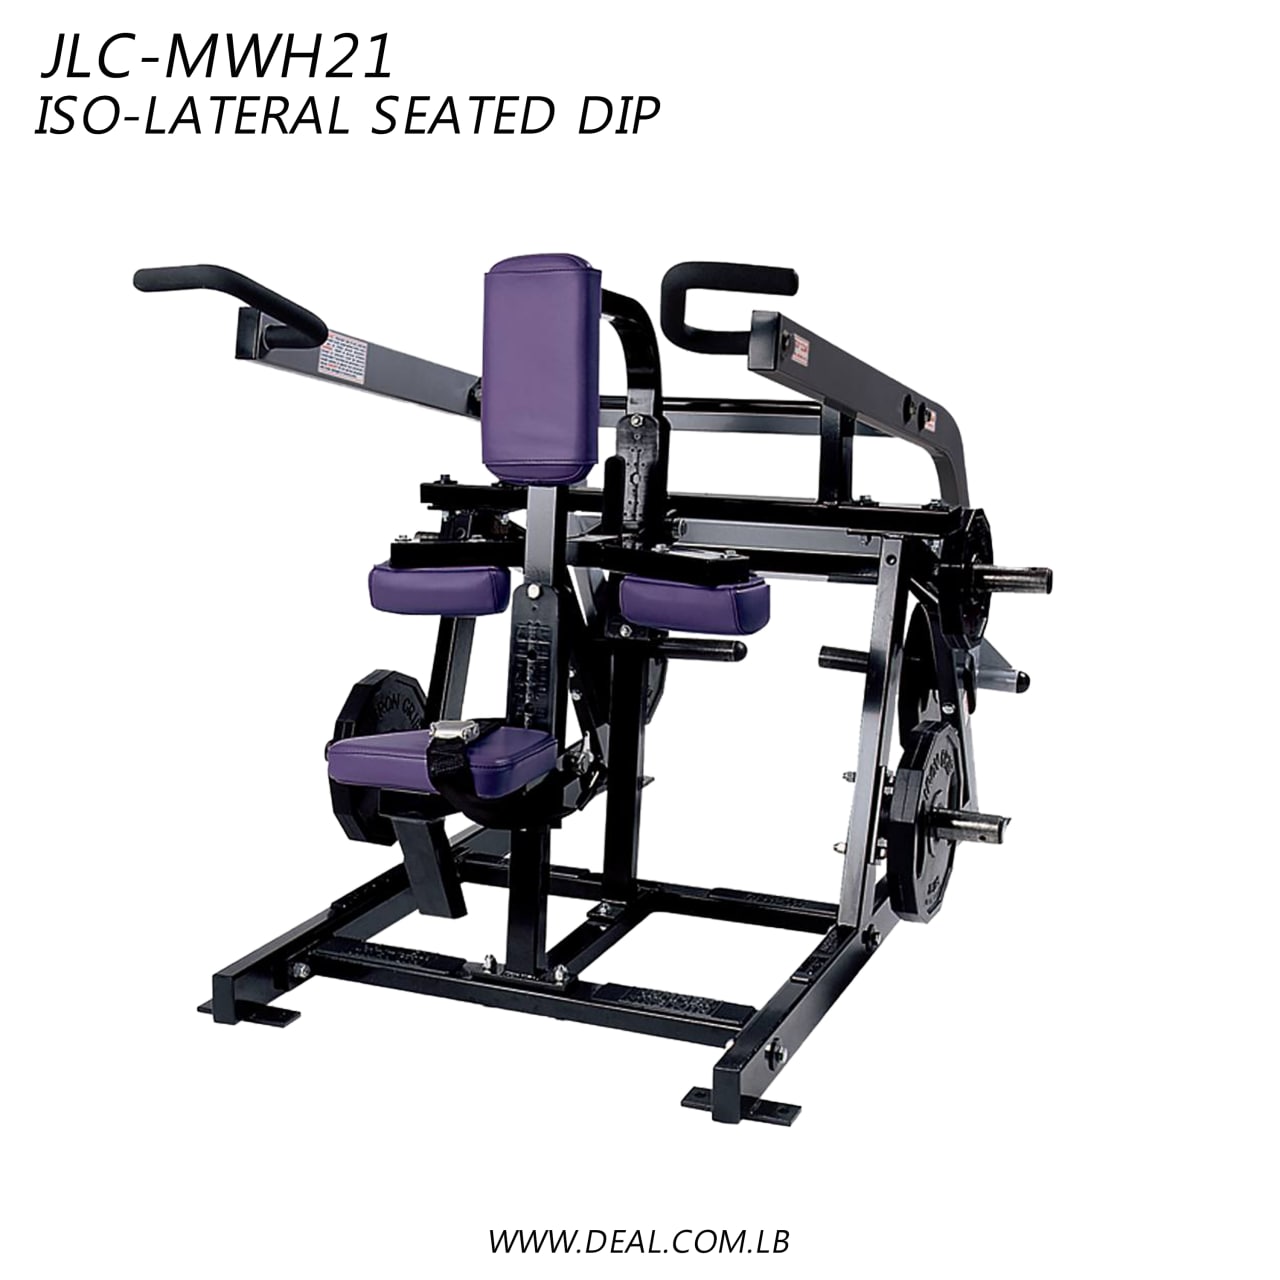 JLC-MWH21+%7C+ISO-Lateral+seated+dip